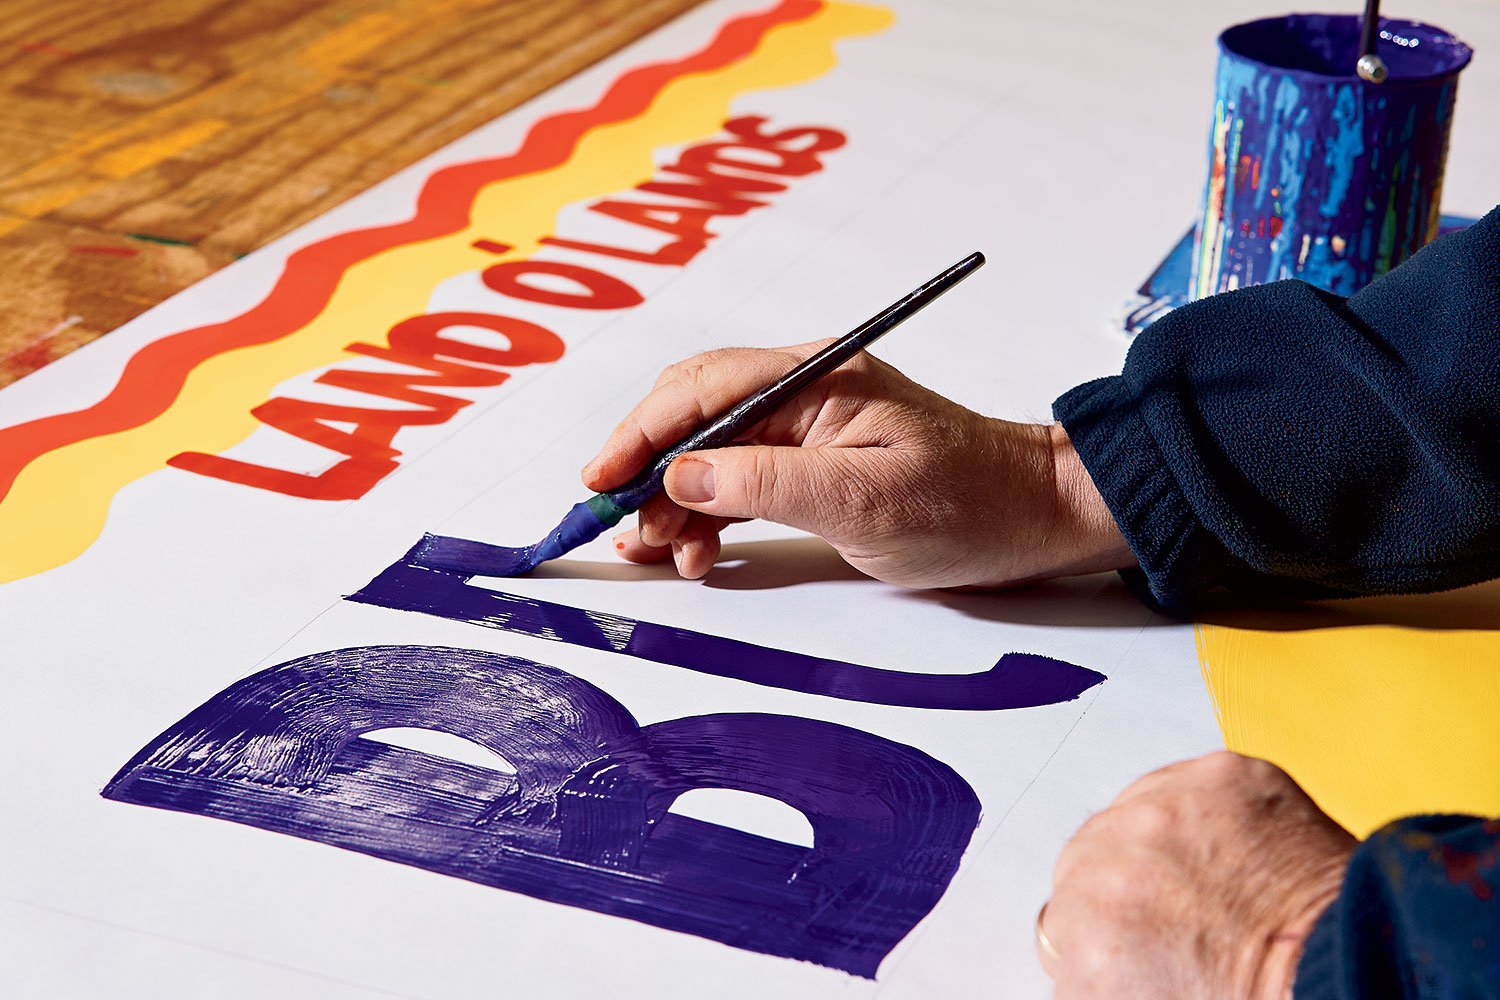 A grocery sign being painted.